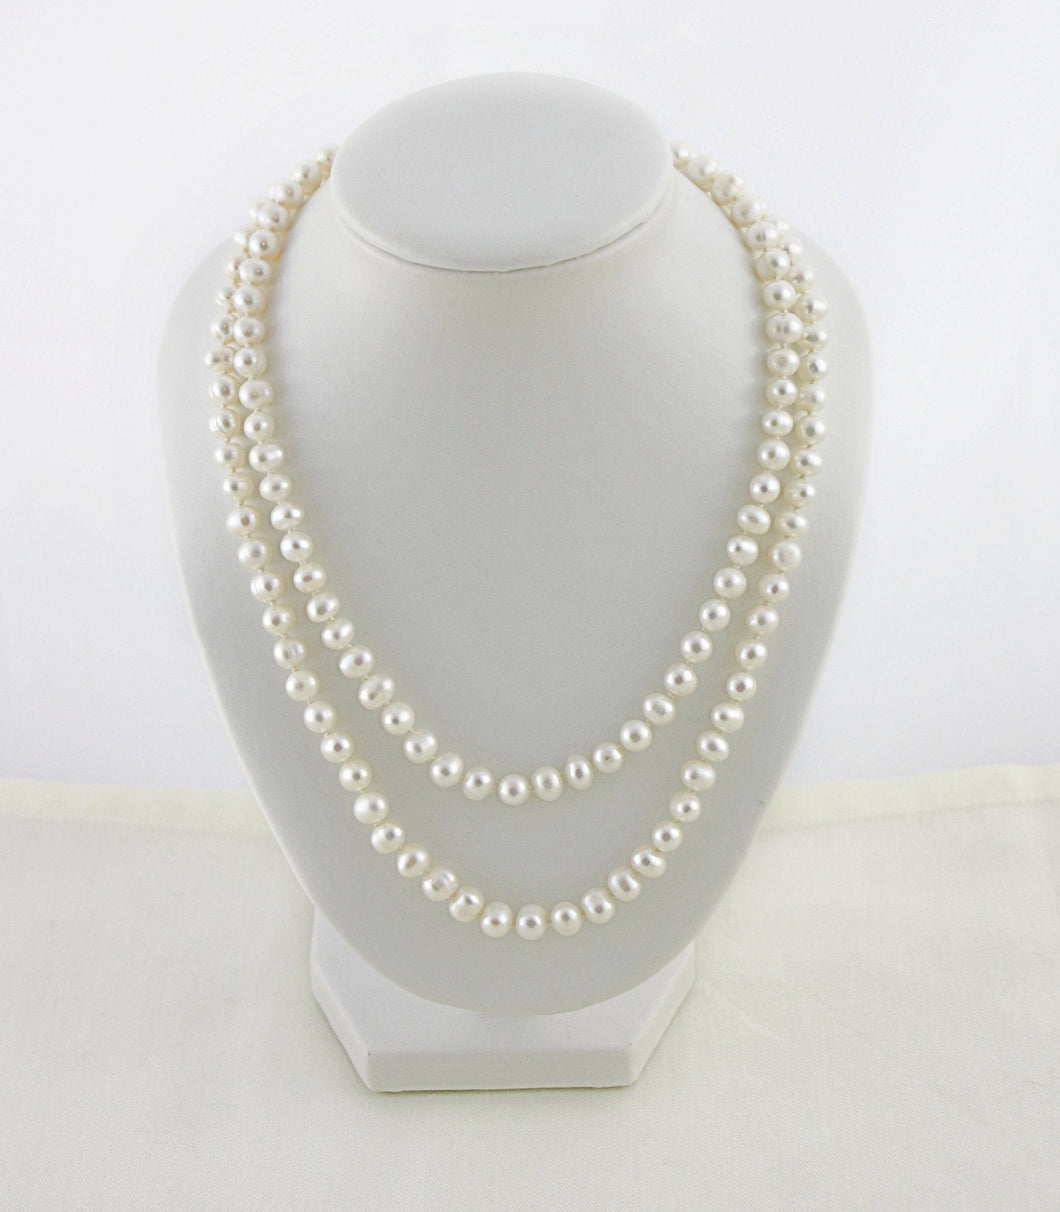 Two Strand Pearl Necklace, Multistrand Pearl Necklace, Wedding Necklace, Vintage 2 Strand Pearl Necklace, Double Strand Pearl Necklace